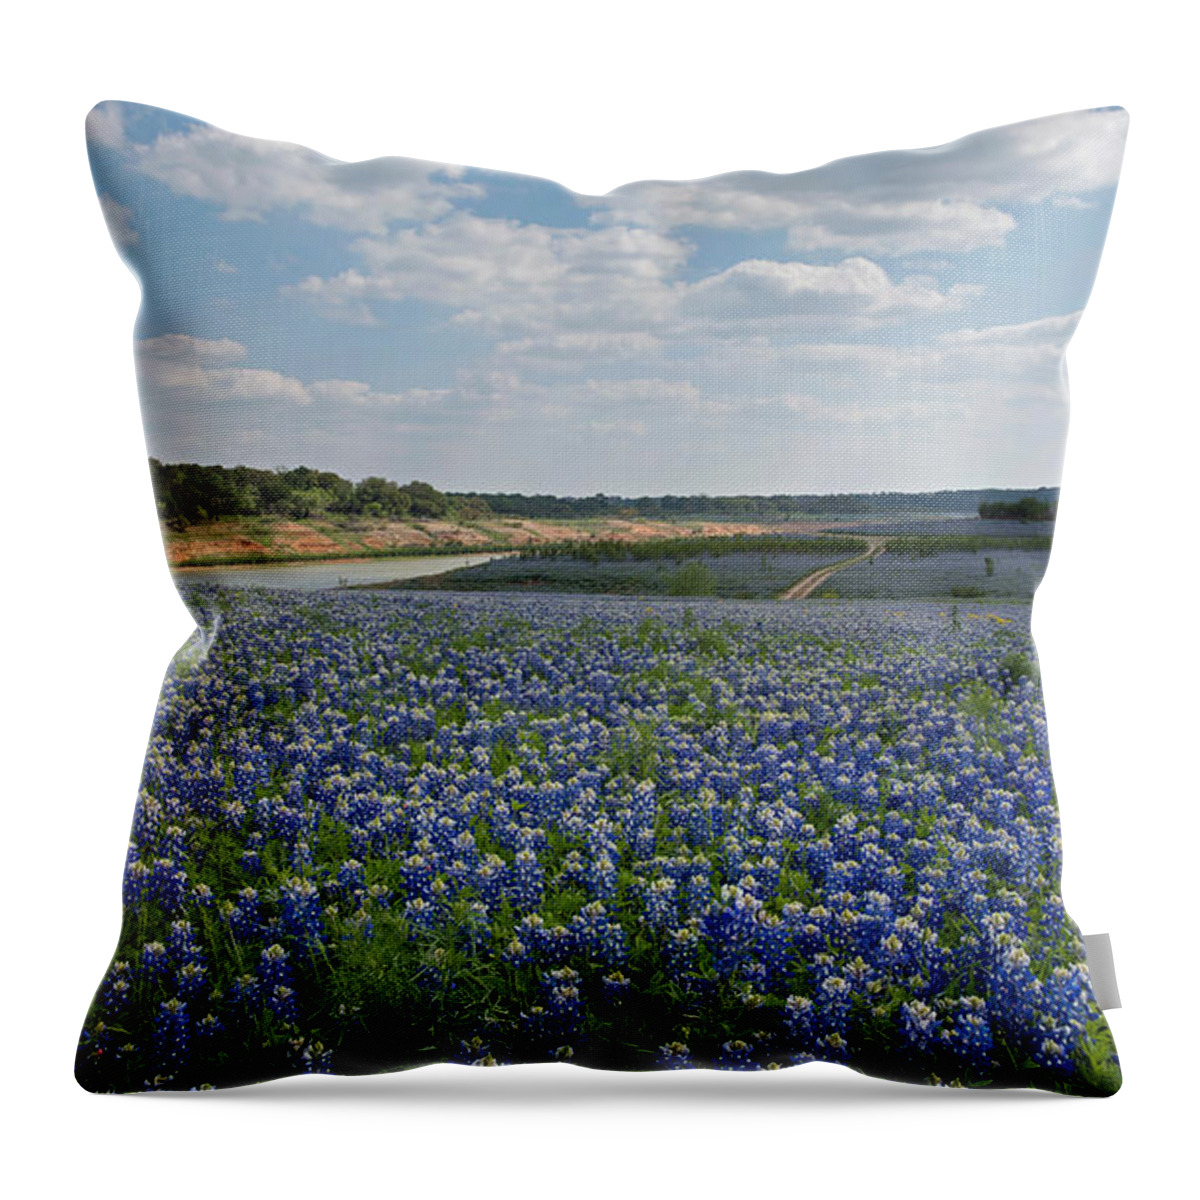 Bluebonnets Throw Pillow featuring the photograph A Sea of Blue by Cathy Alba